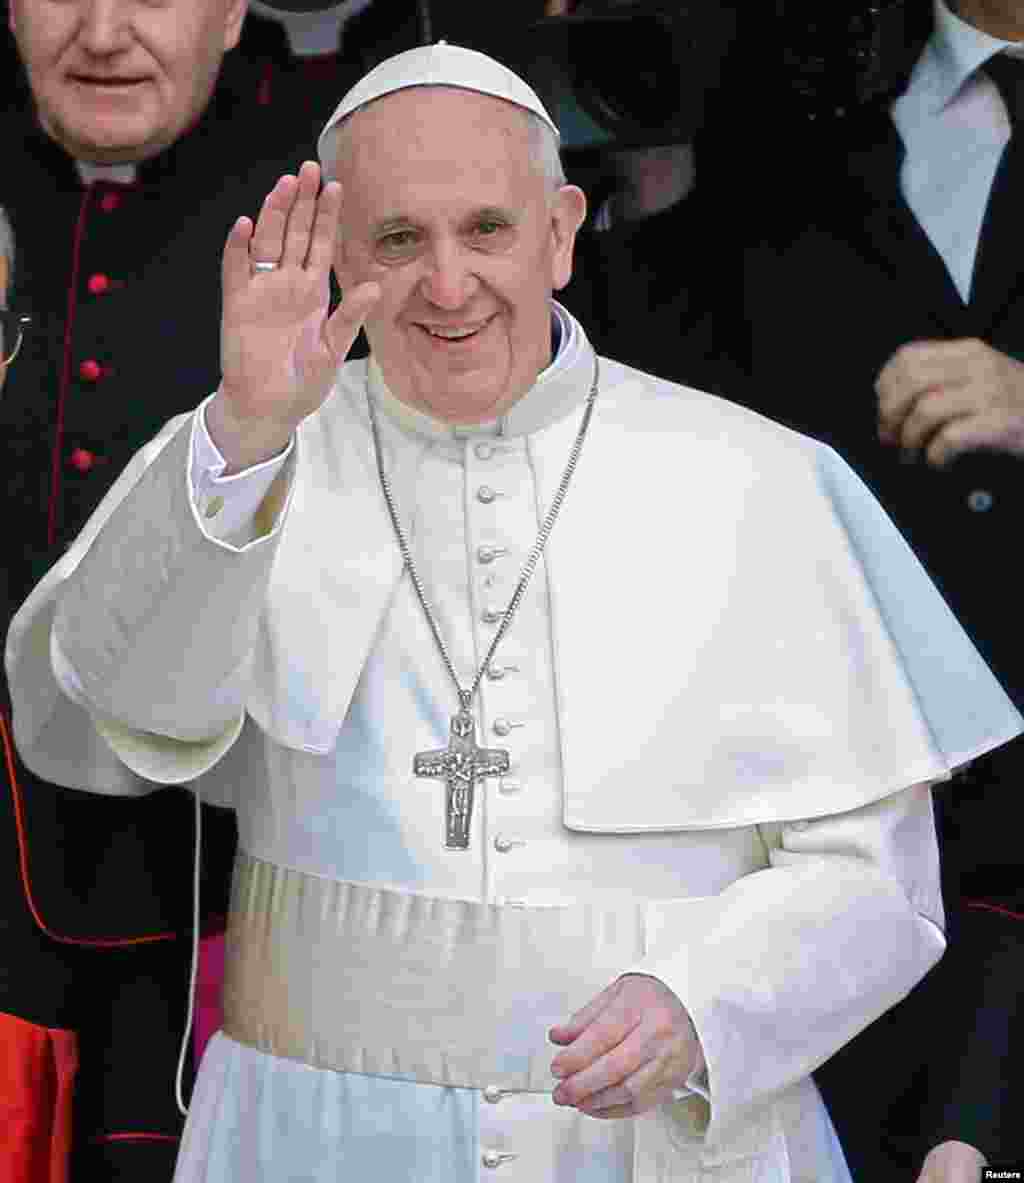 &quot;I... congratulate the people of Argentina because this time, the papacy fell into their country.&quot; John Dhiil Thak Kuland, Bentiu Newly elected Pope Francis, Cardinal Jorge Mario Bergoglio of Argentina, waves as he leaves the Santa Maria Maggiore Basilica in Rome, Italy, March 14, 2013